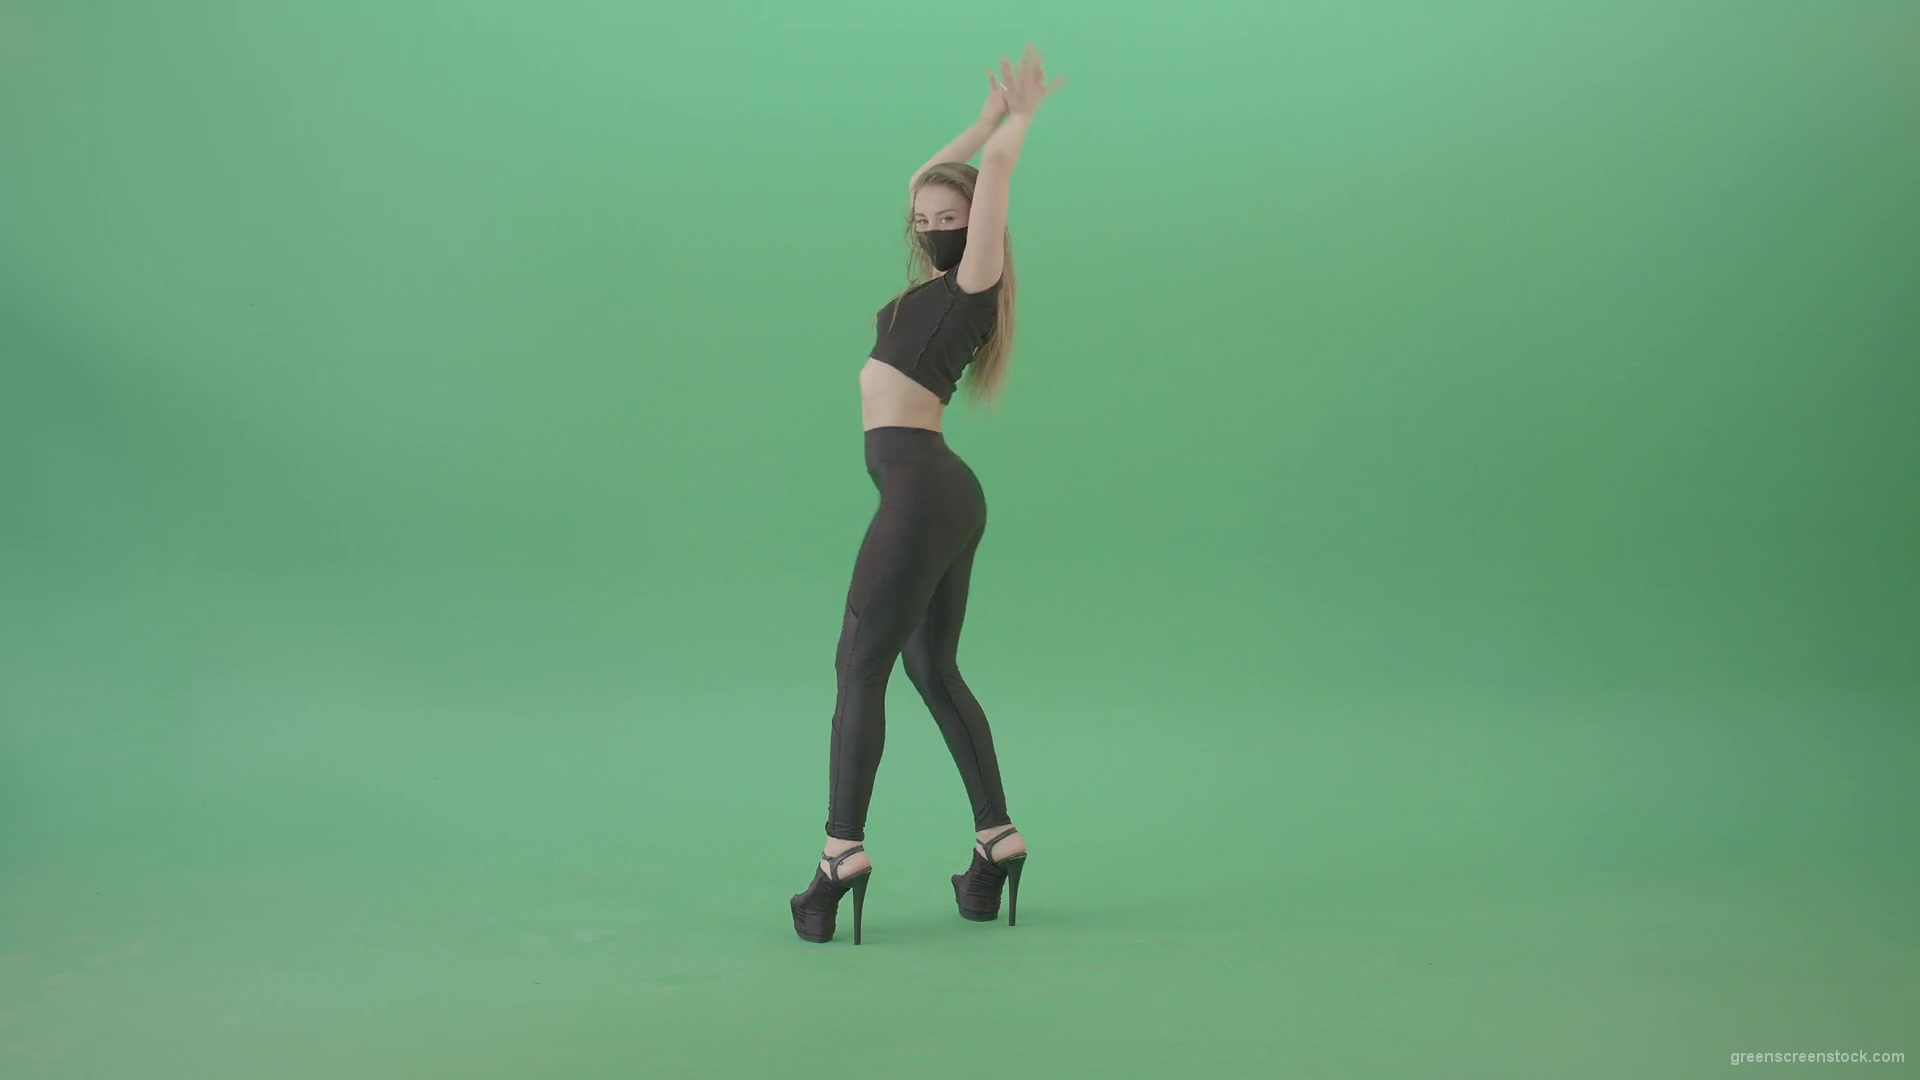 Exotic-sexy-dance-by-girl-in-black-latex-dress-isolated-on-green-screen-4K-Video-Footage-1920_004 Green Screen Stock